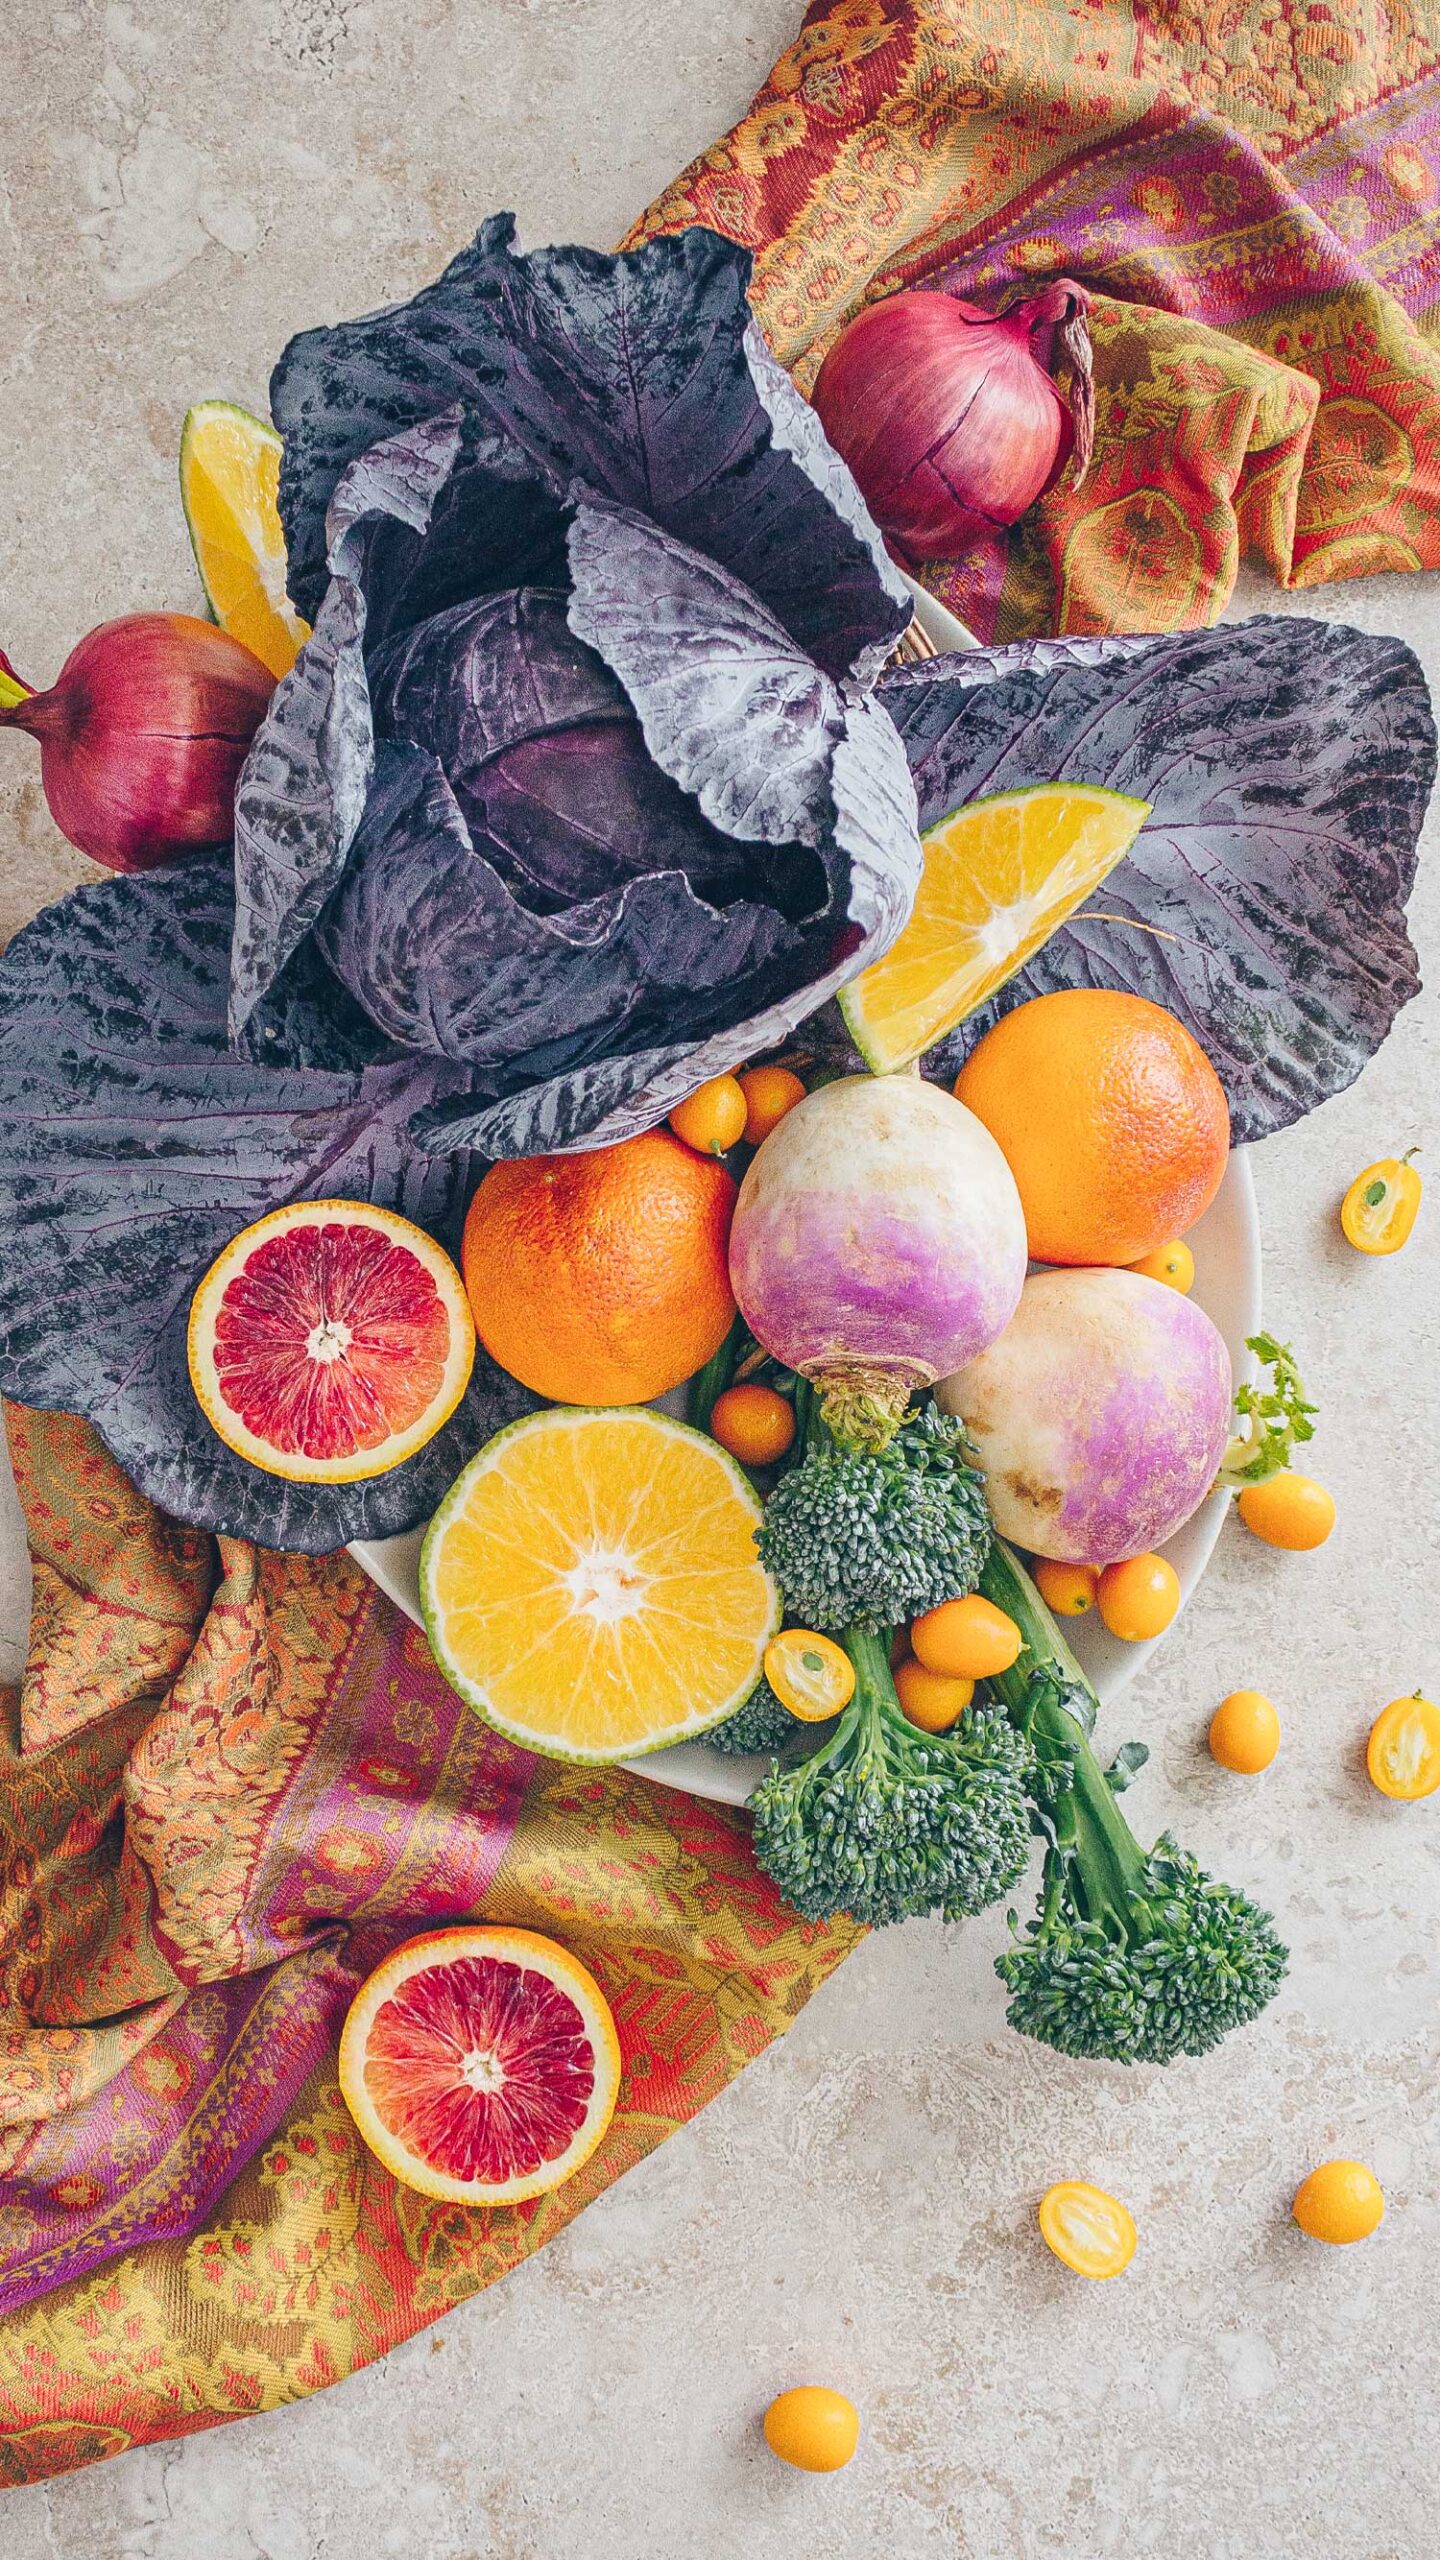 A display of seasonal fruits and vegetables for February: purple cabbage, turnips, broccoli, onions, blood oranges, ugly fruit, and kumquats on a paisley runner.